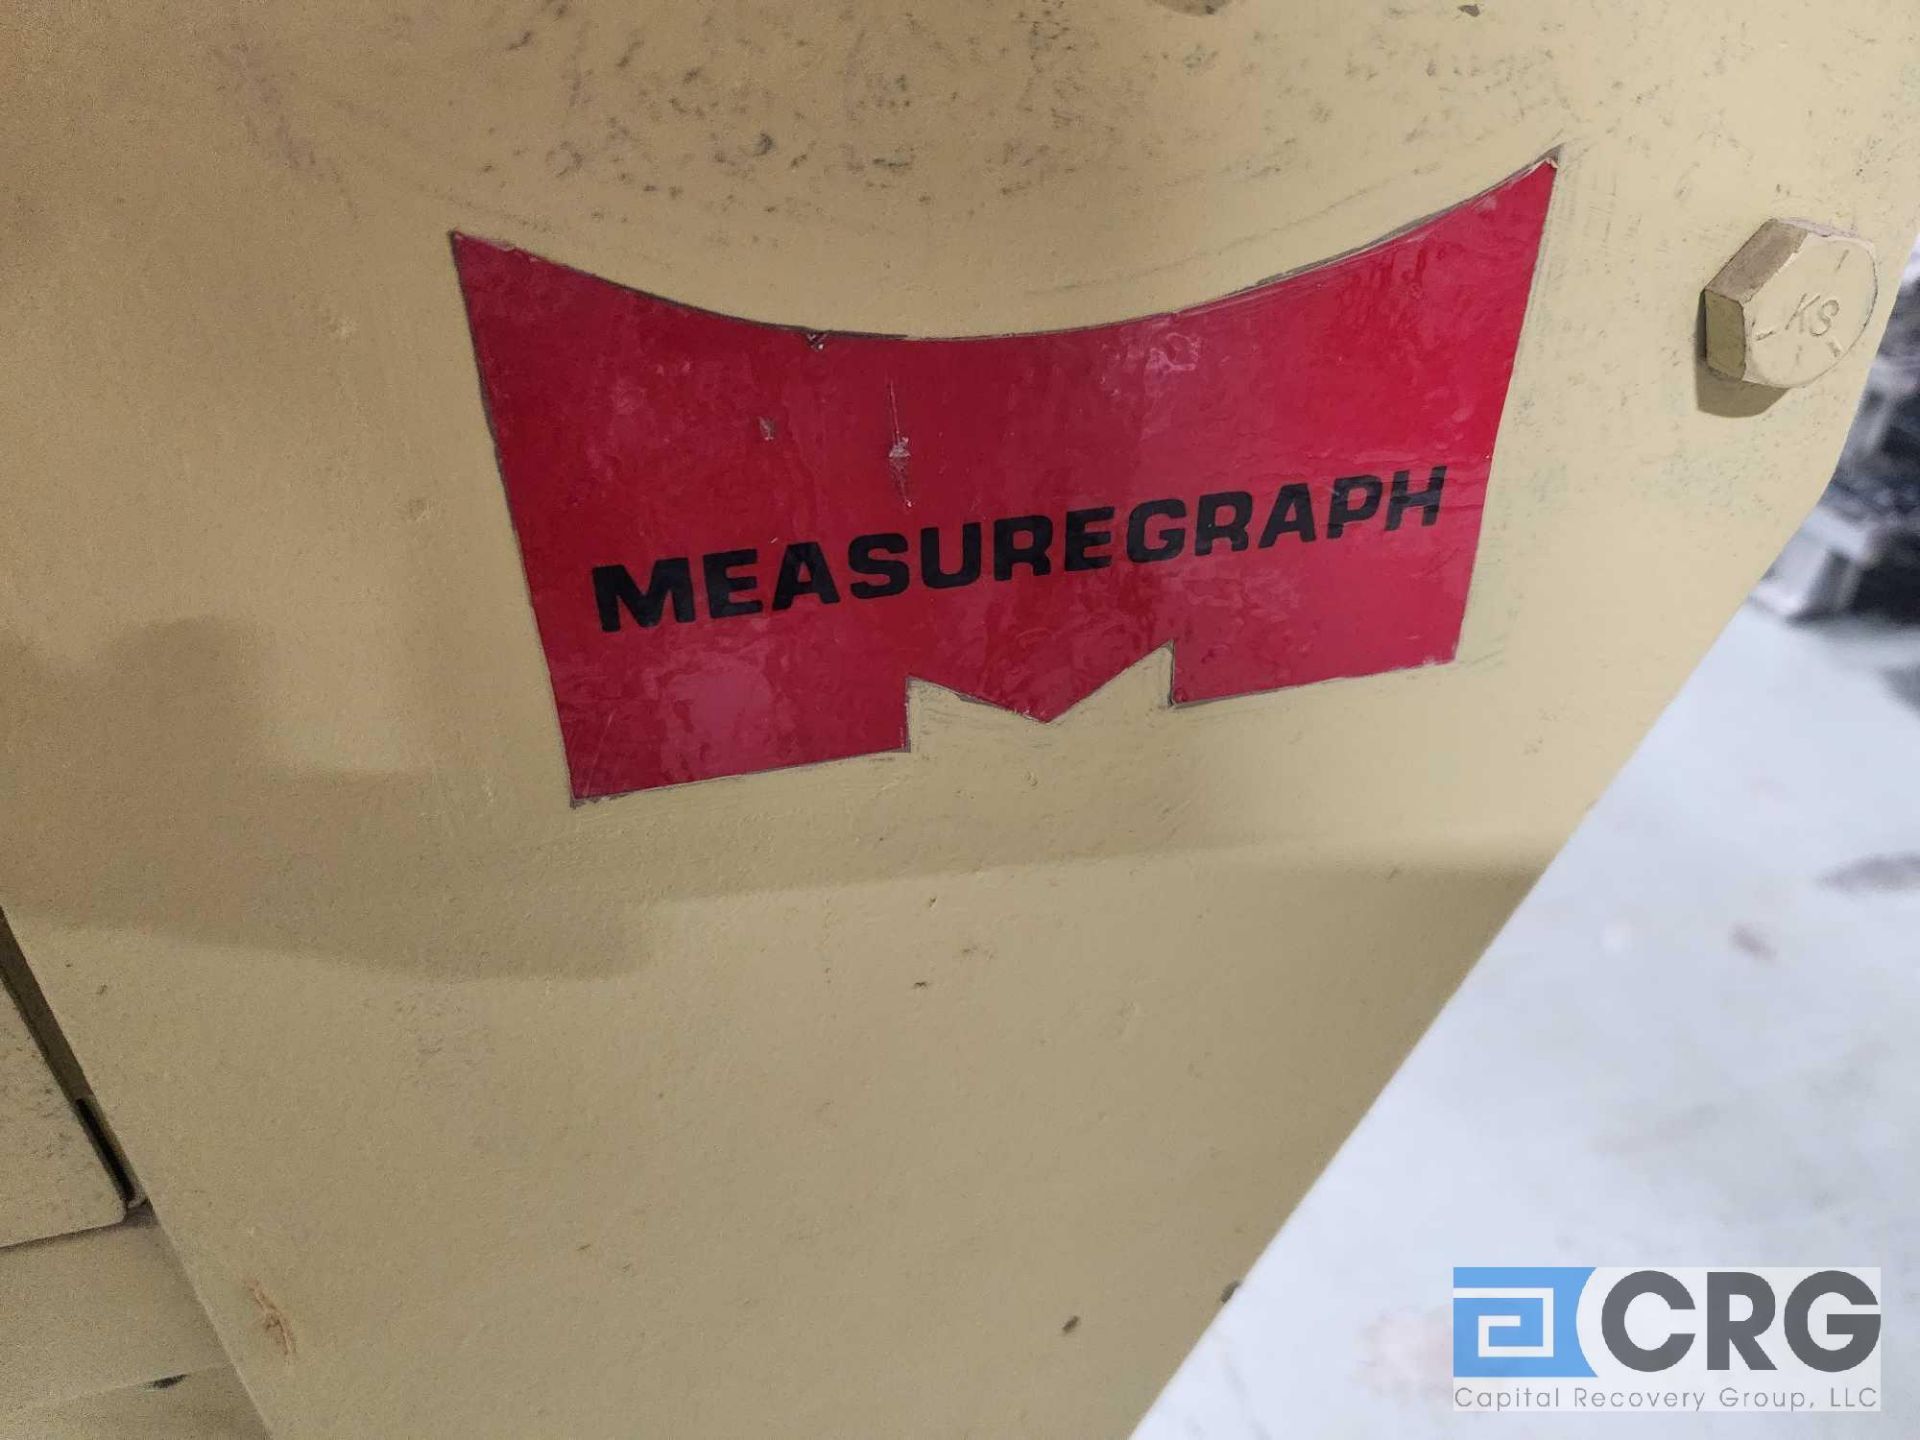 Measuregraph Measuremaster 261 fabric roll cutter, 72 inch table - Image 2 of 4